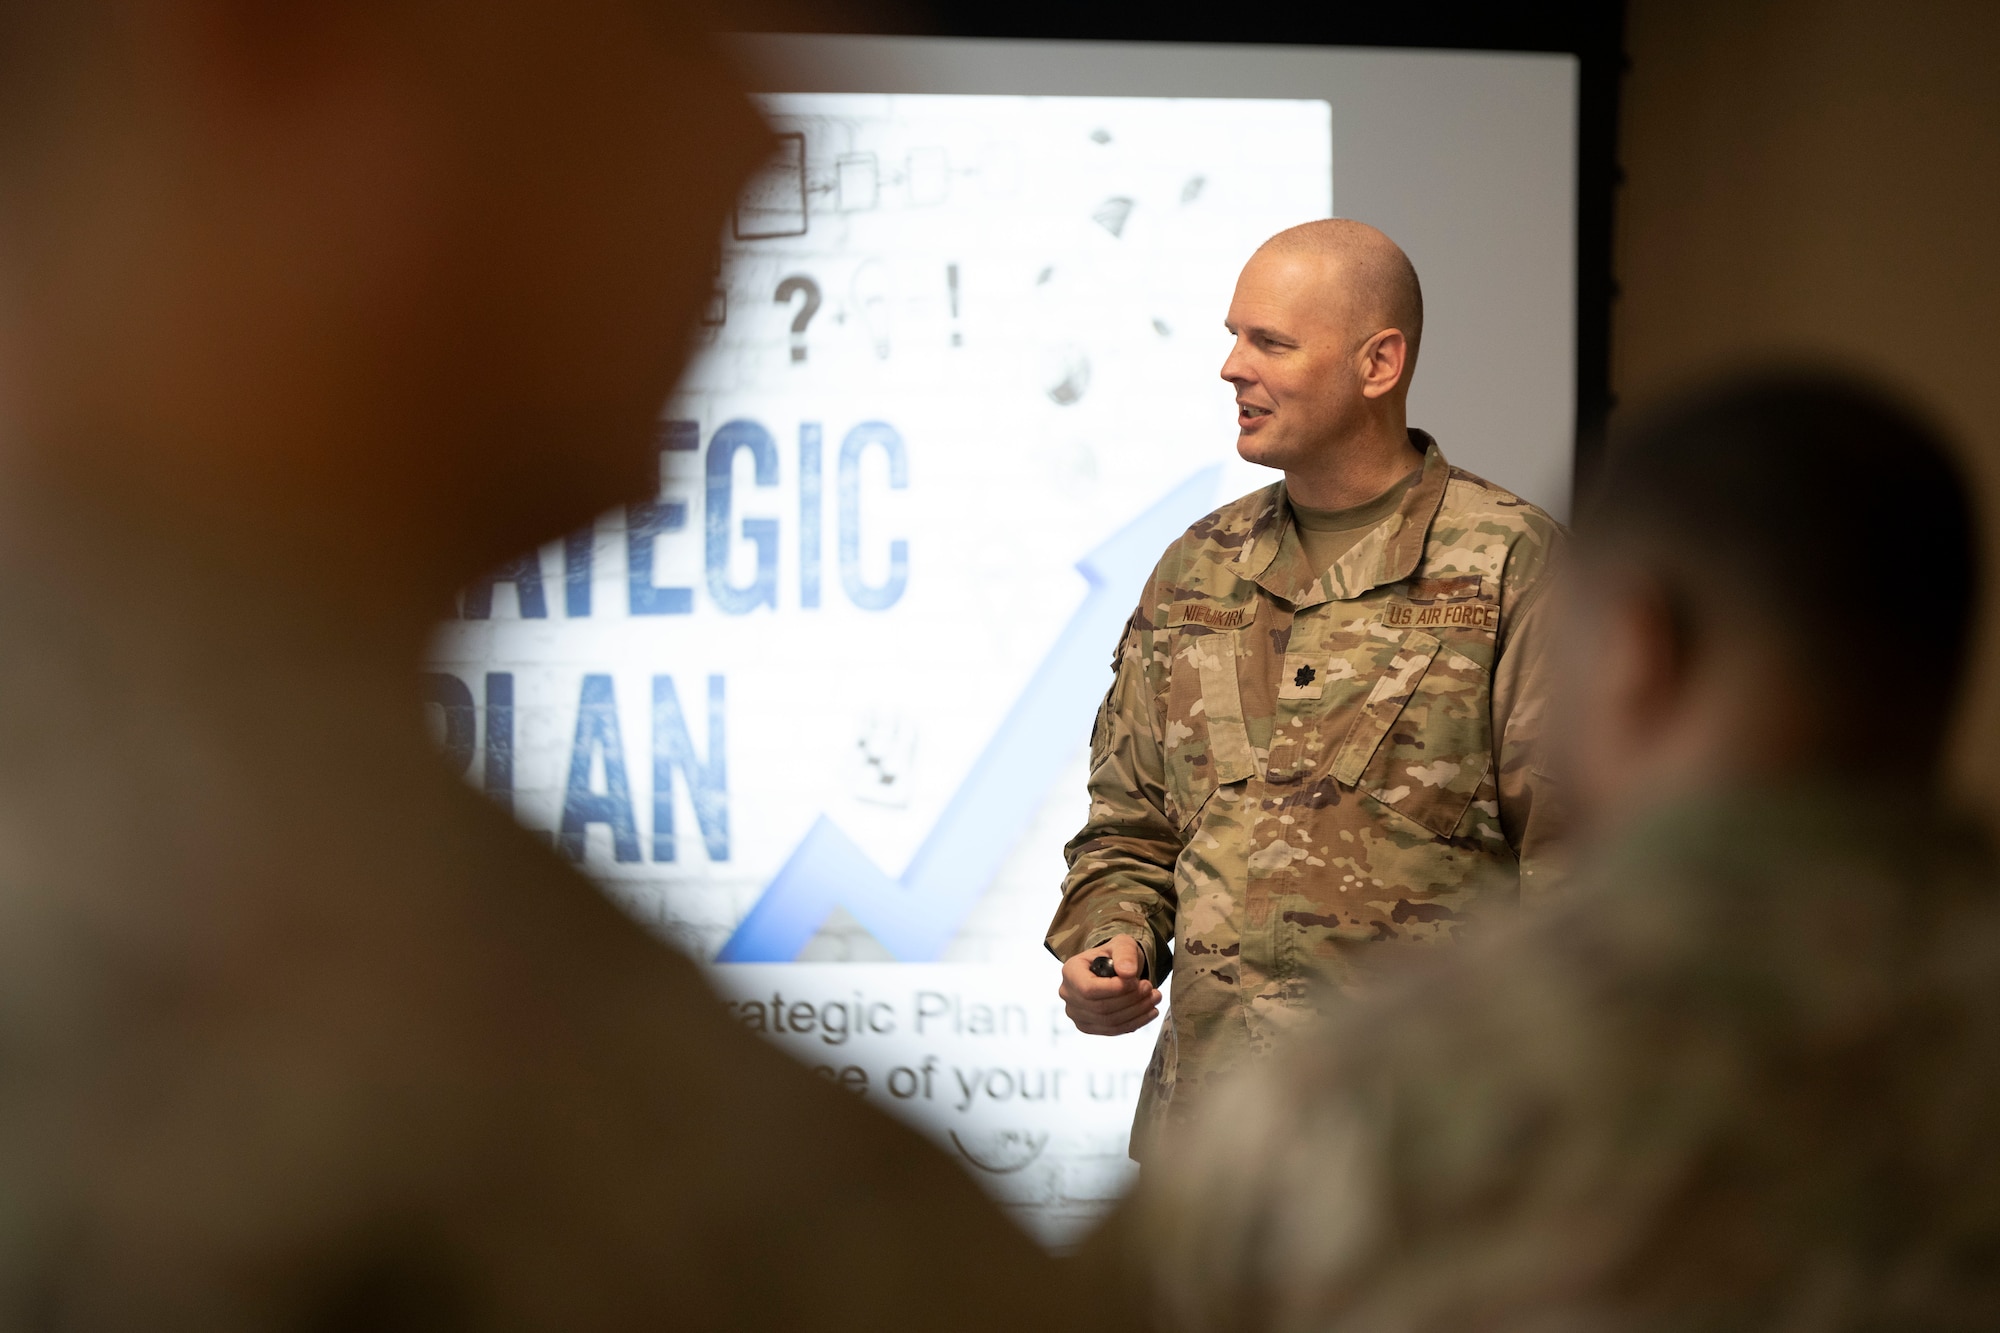 U.S. Air Force Lt. Col. Roy Nieukirk, the deputy Inspector General of the National Guard Bureau, briefs Airmen during the Unit Leadership Workshop course at Muñiz Air National Guard Base, Carolina, Puerto Rico, Jan. 25, 2024. The one-day course, developed by the National Guard Bureau Inspector General's office, seeked to address deficiencies identified in unit self-assessment programs and promoted continuous process improvement. (U.S. Air National Guard photo by Master Sgt. Rafael D. Rosa)